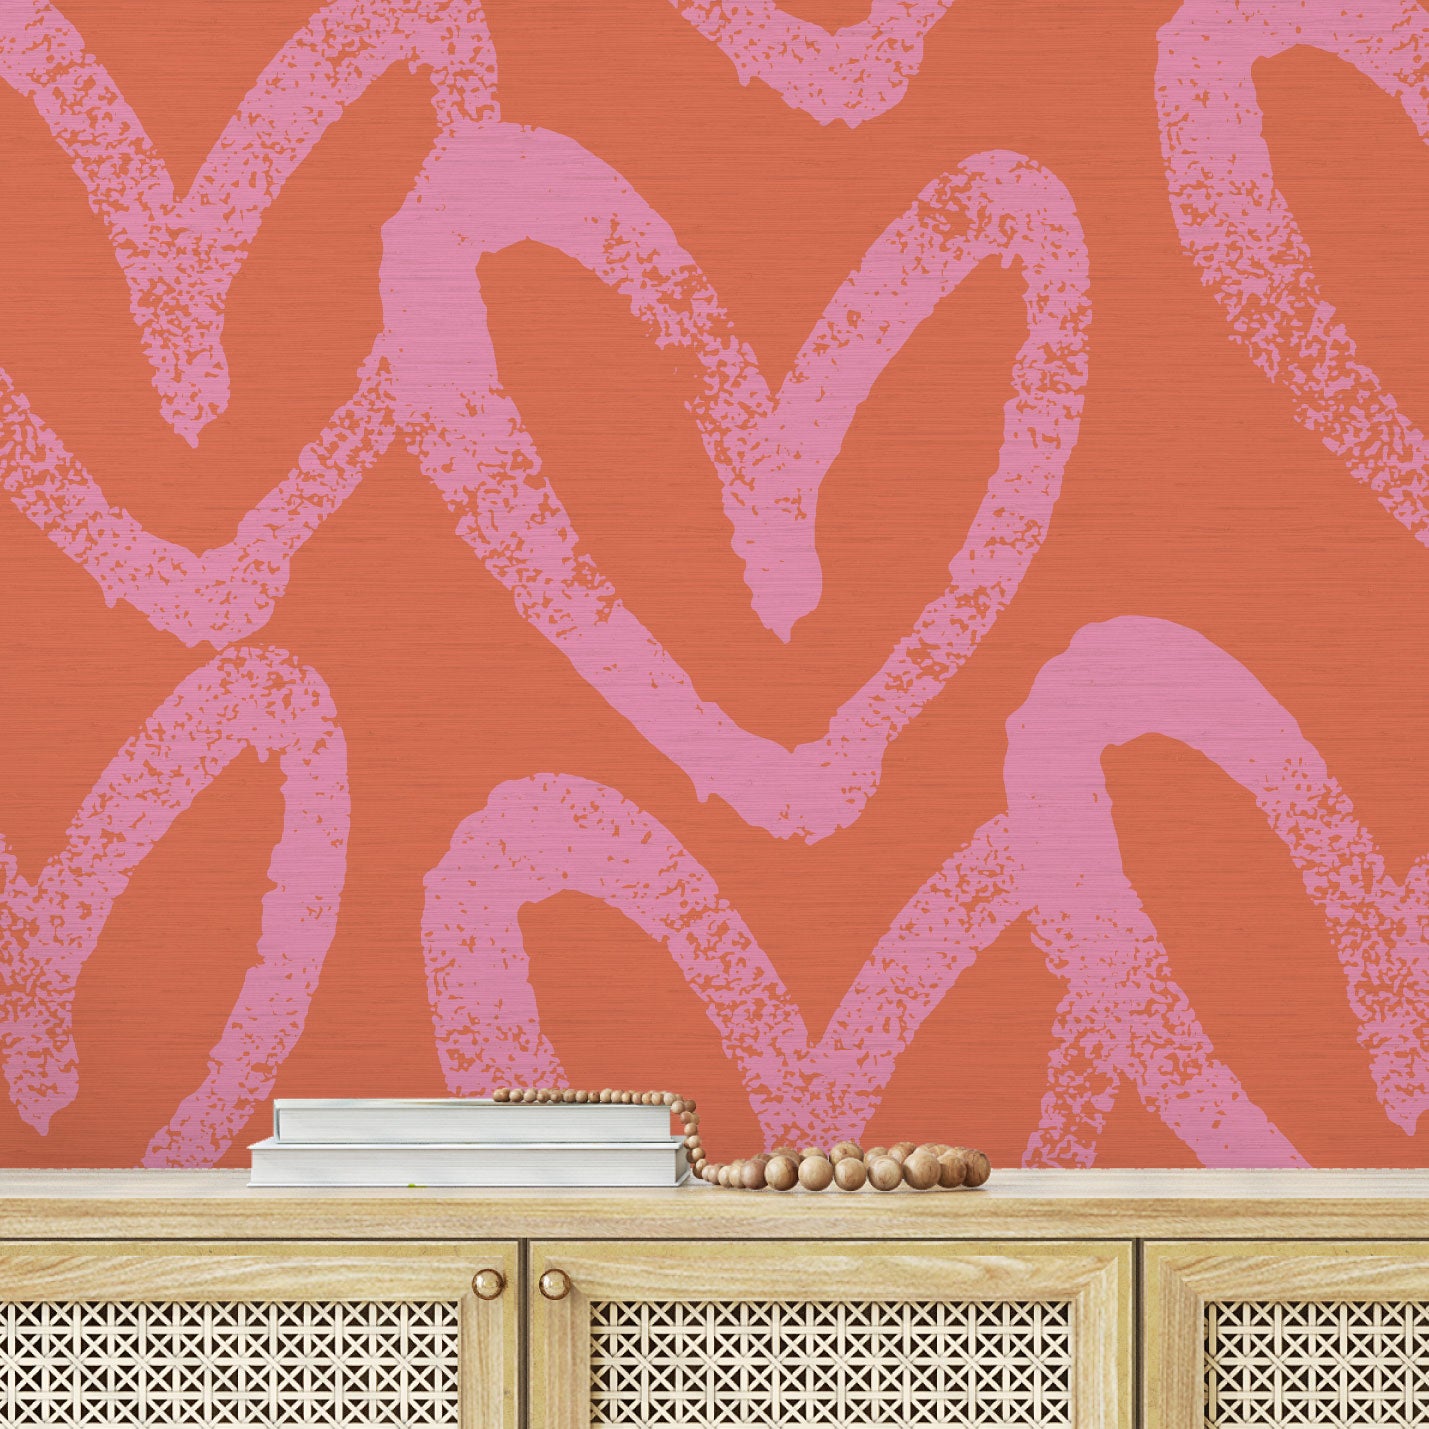 printed grasscloth wallpaper oversized heart print assortment collaboration with House of Shannon shan Natural Textured Eco-Friendly Non-toxic High-quality Sustainable practices Sustainability Interior Design Wall covering Bold Wallpaper Custom Tailor-made Retro chic kids playroom hand drawn fun pink coral hot pink red orange living room foyer entrance hallway bathroom